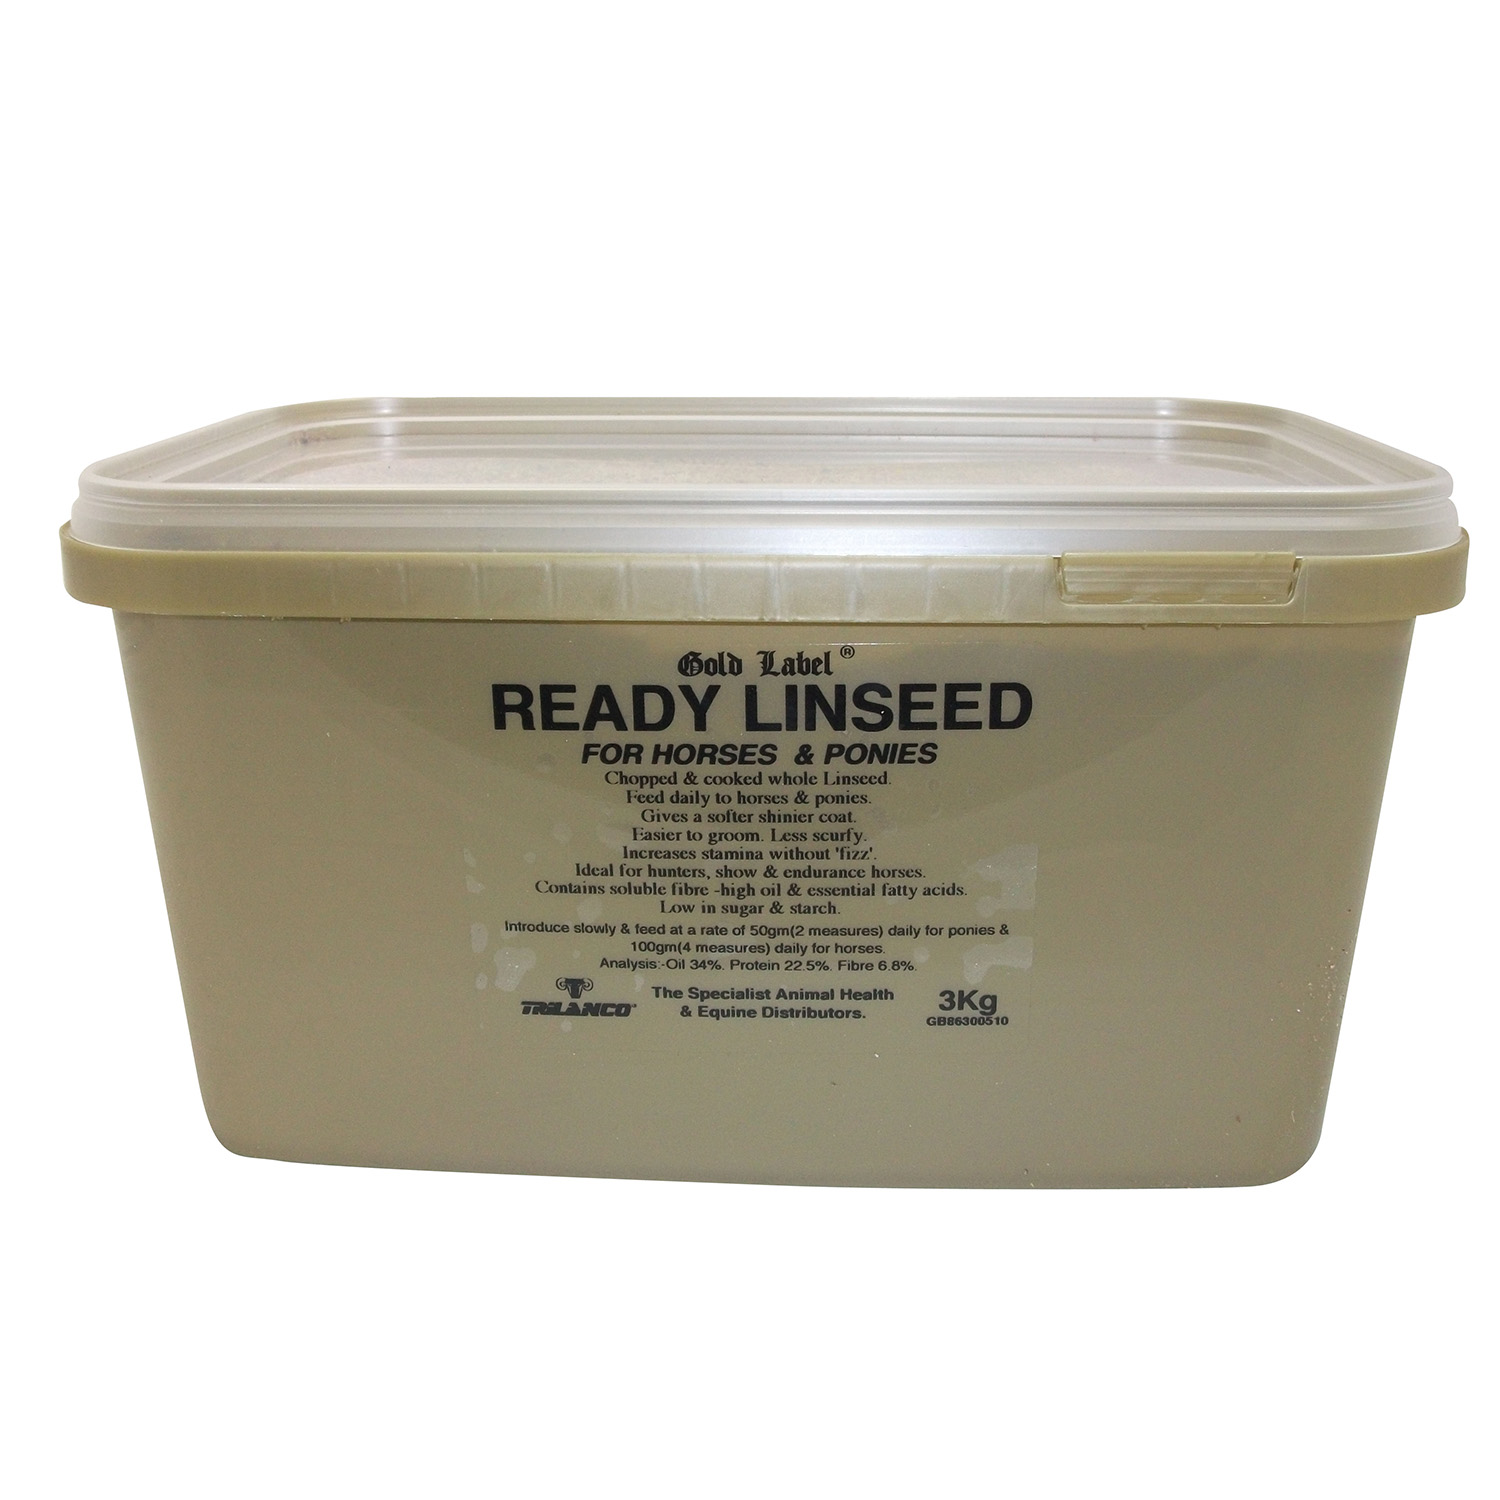 GOLD LABEL READY LINSEED 3 KG 3 KG